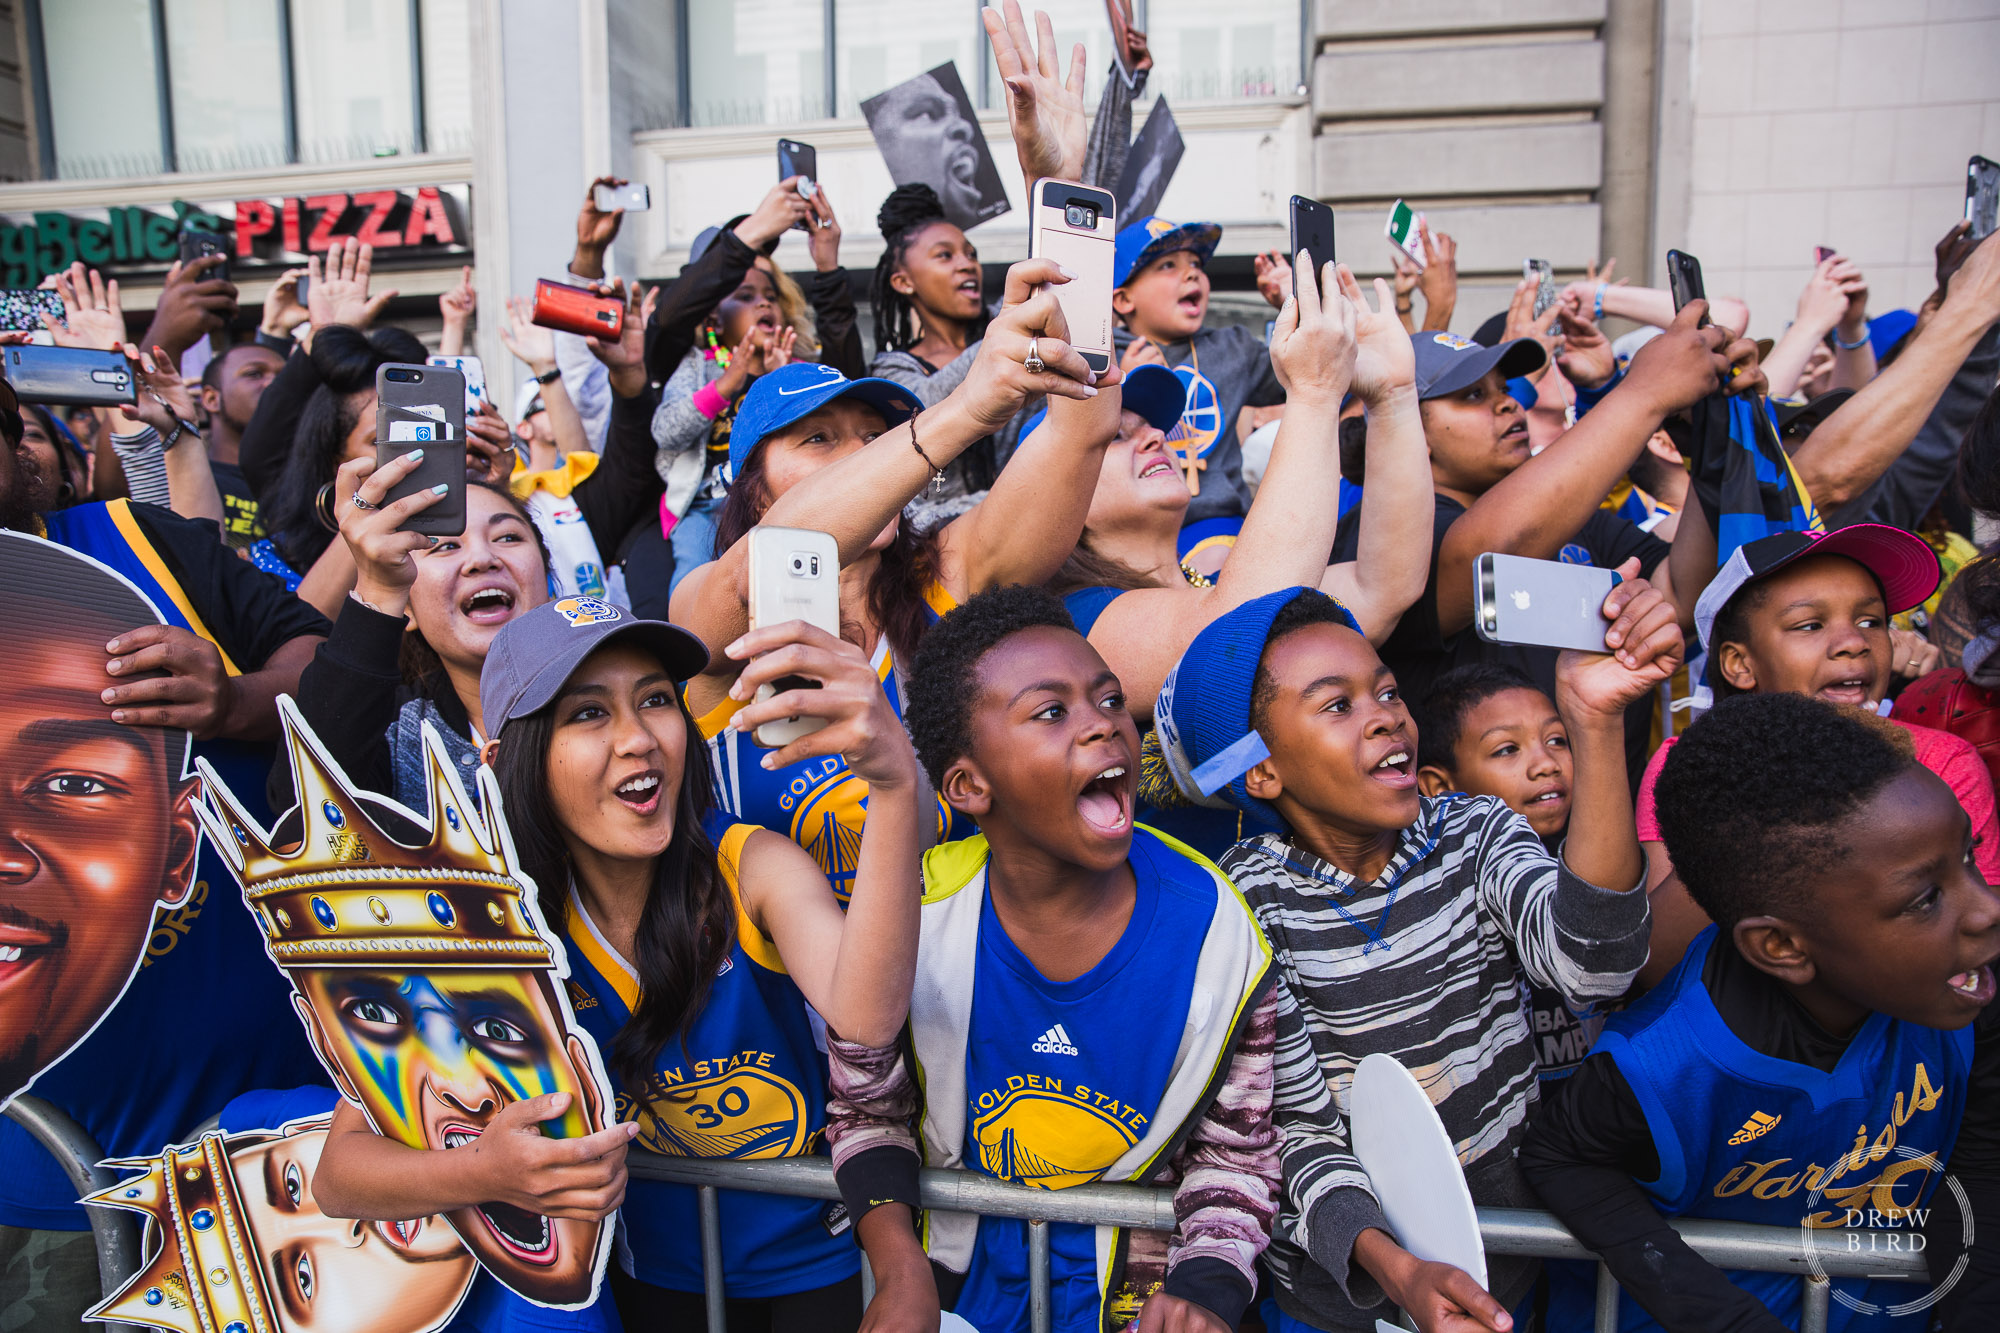 Cheering crowd at Golden State Warriors parade. Editorial photo by San Francisco photographer Drew Bird.